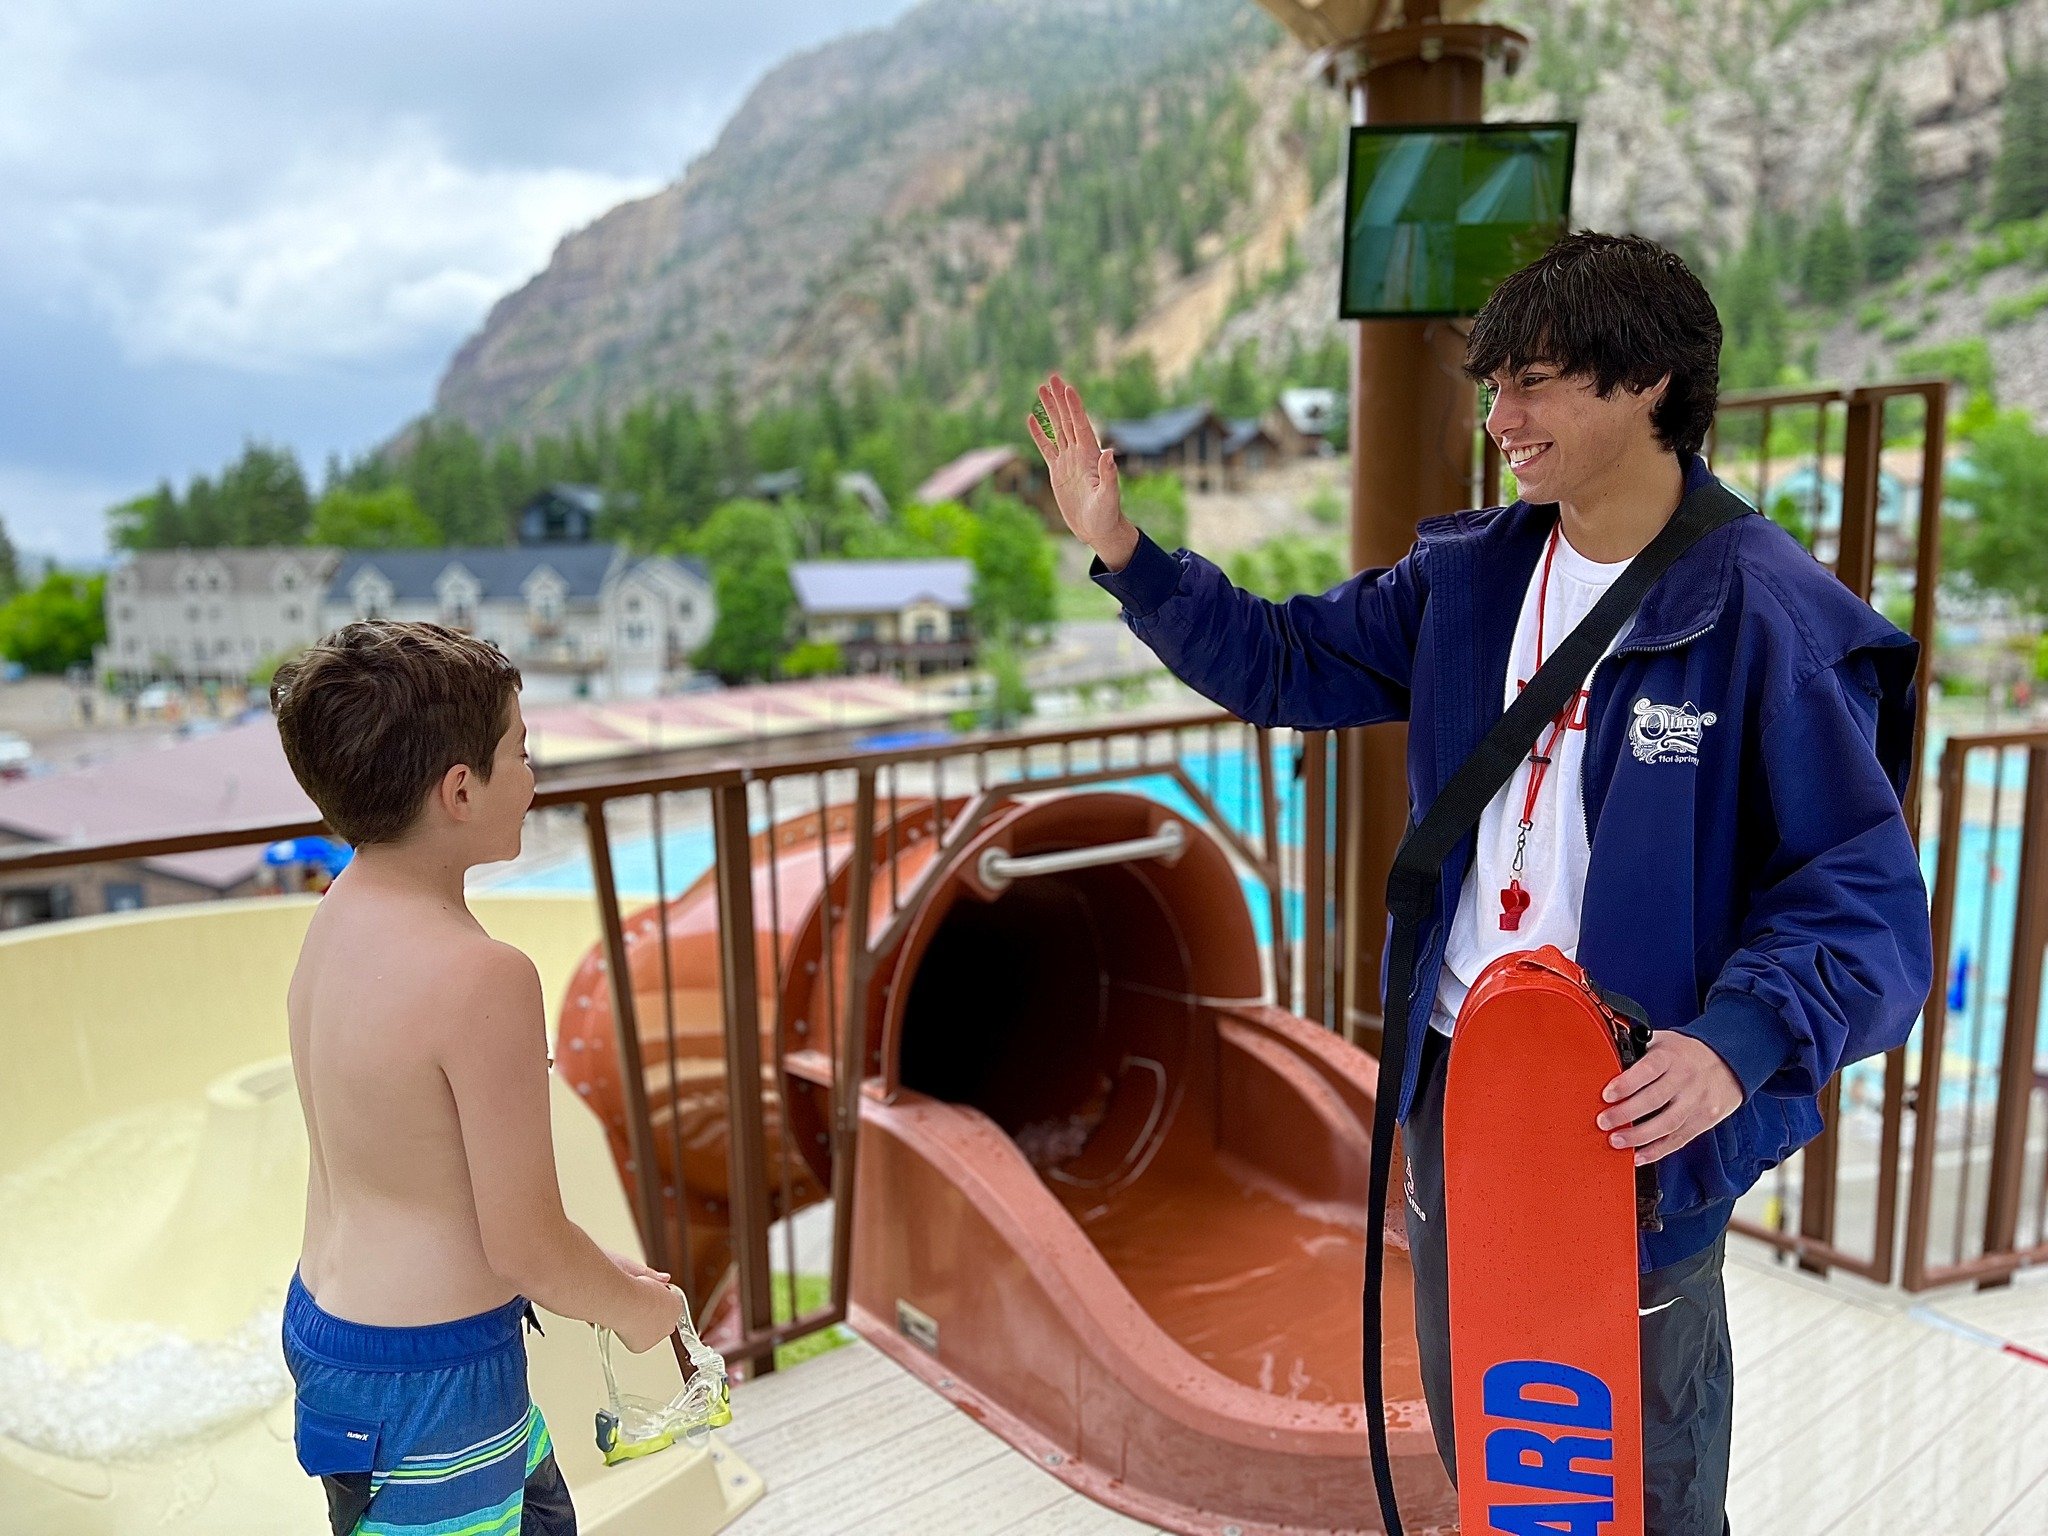 Life guard high fiving boy on waterslide